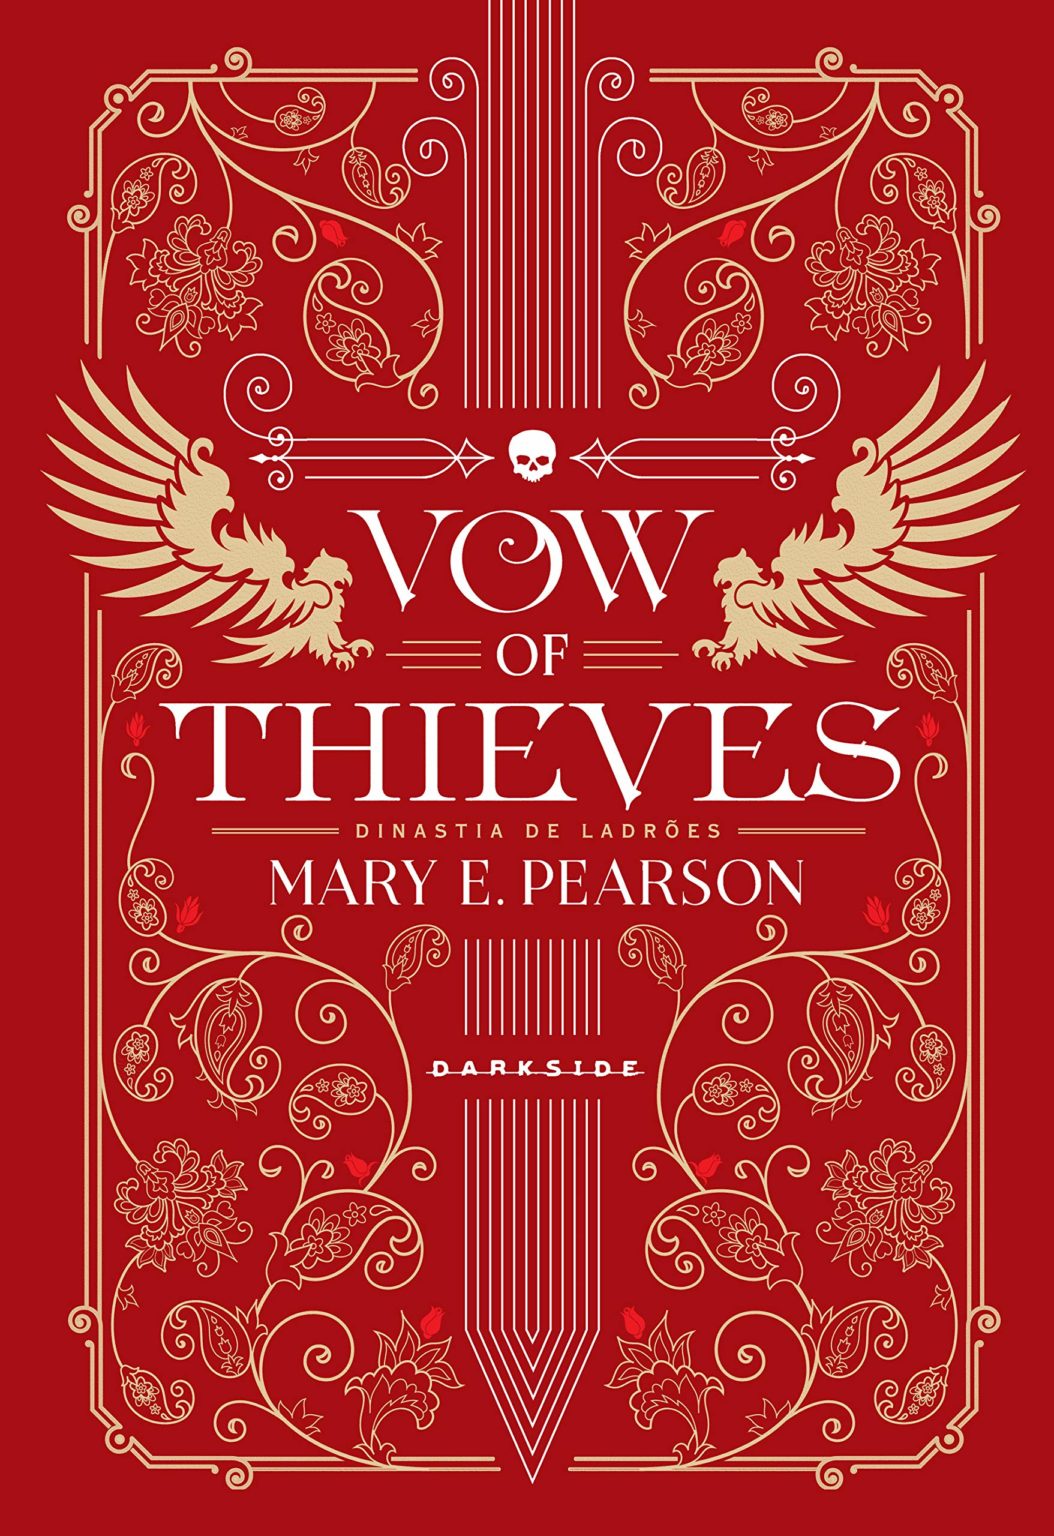 Vow Of Thieves Capa 1054x1536 